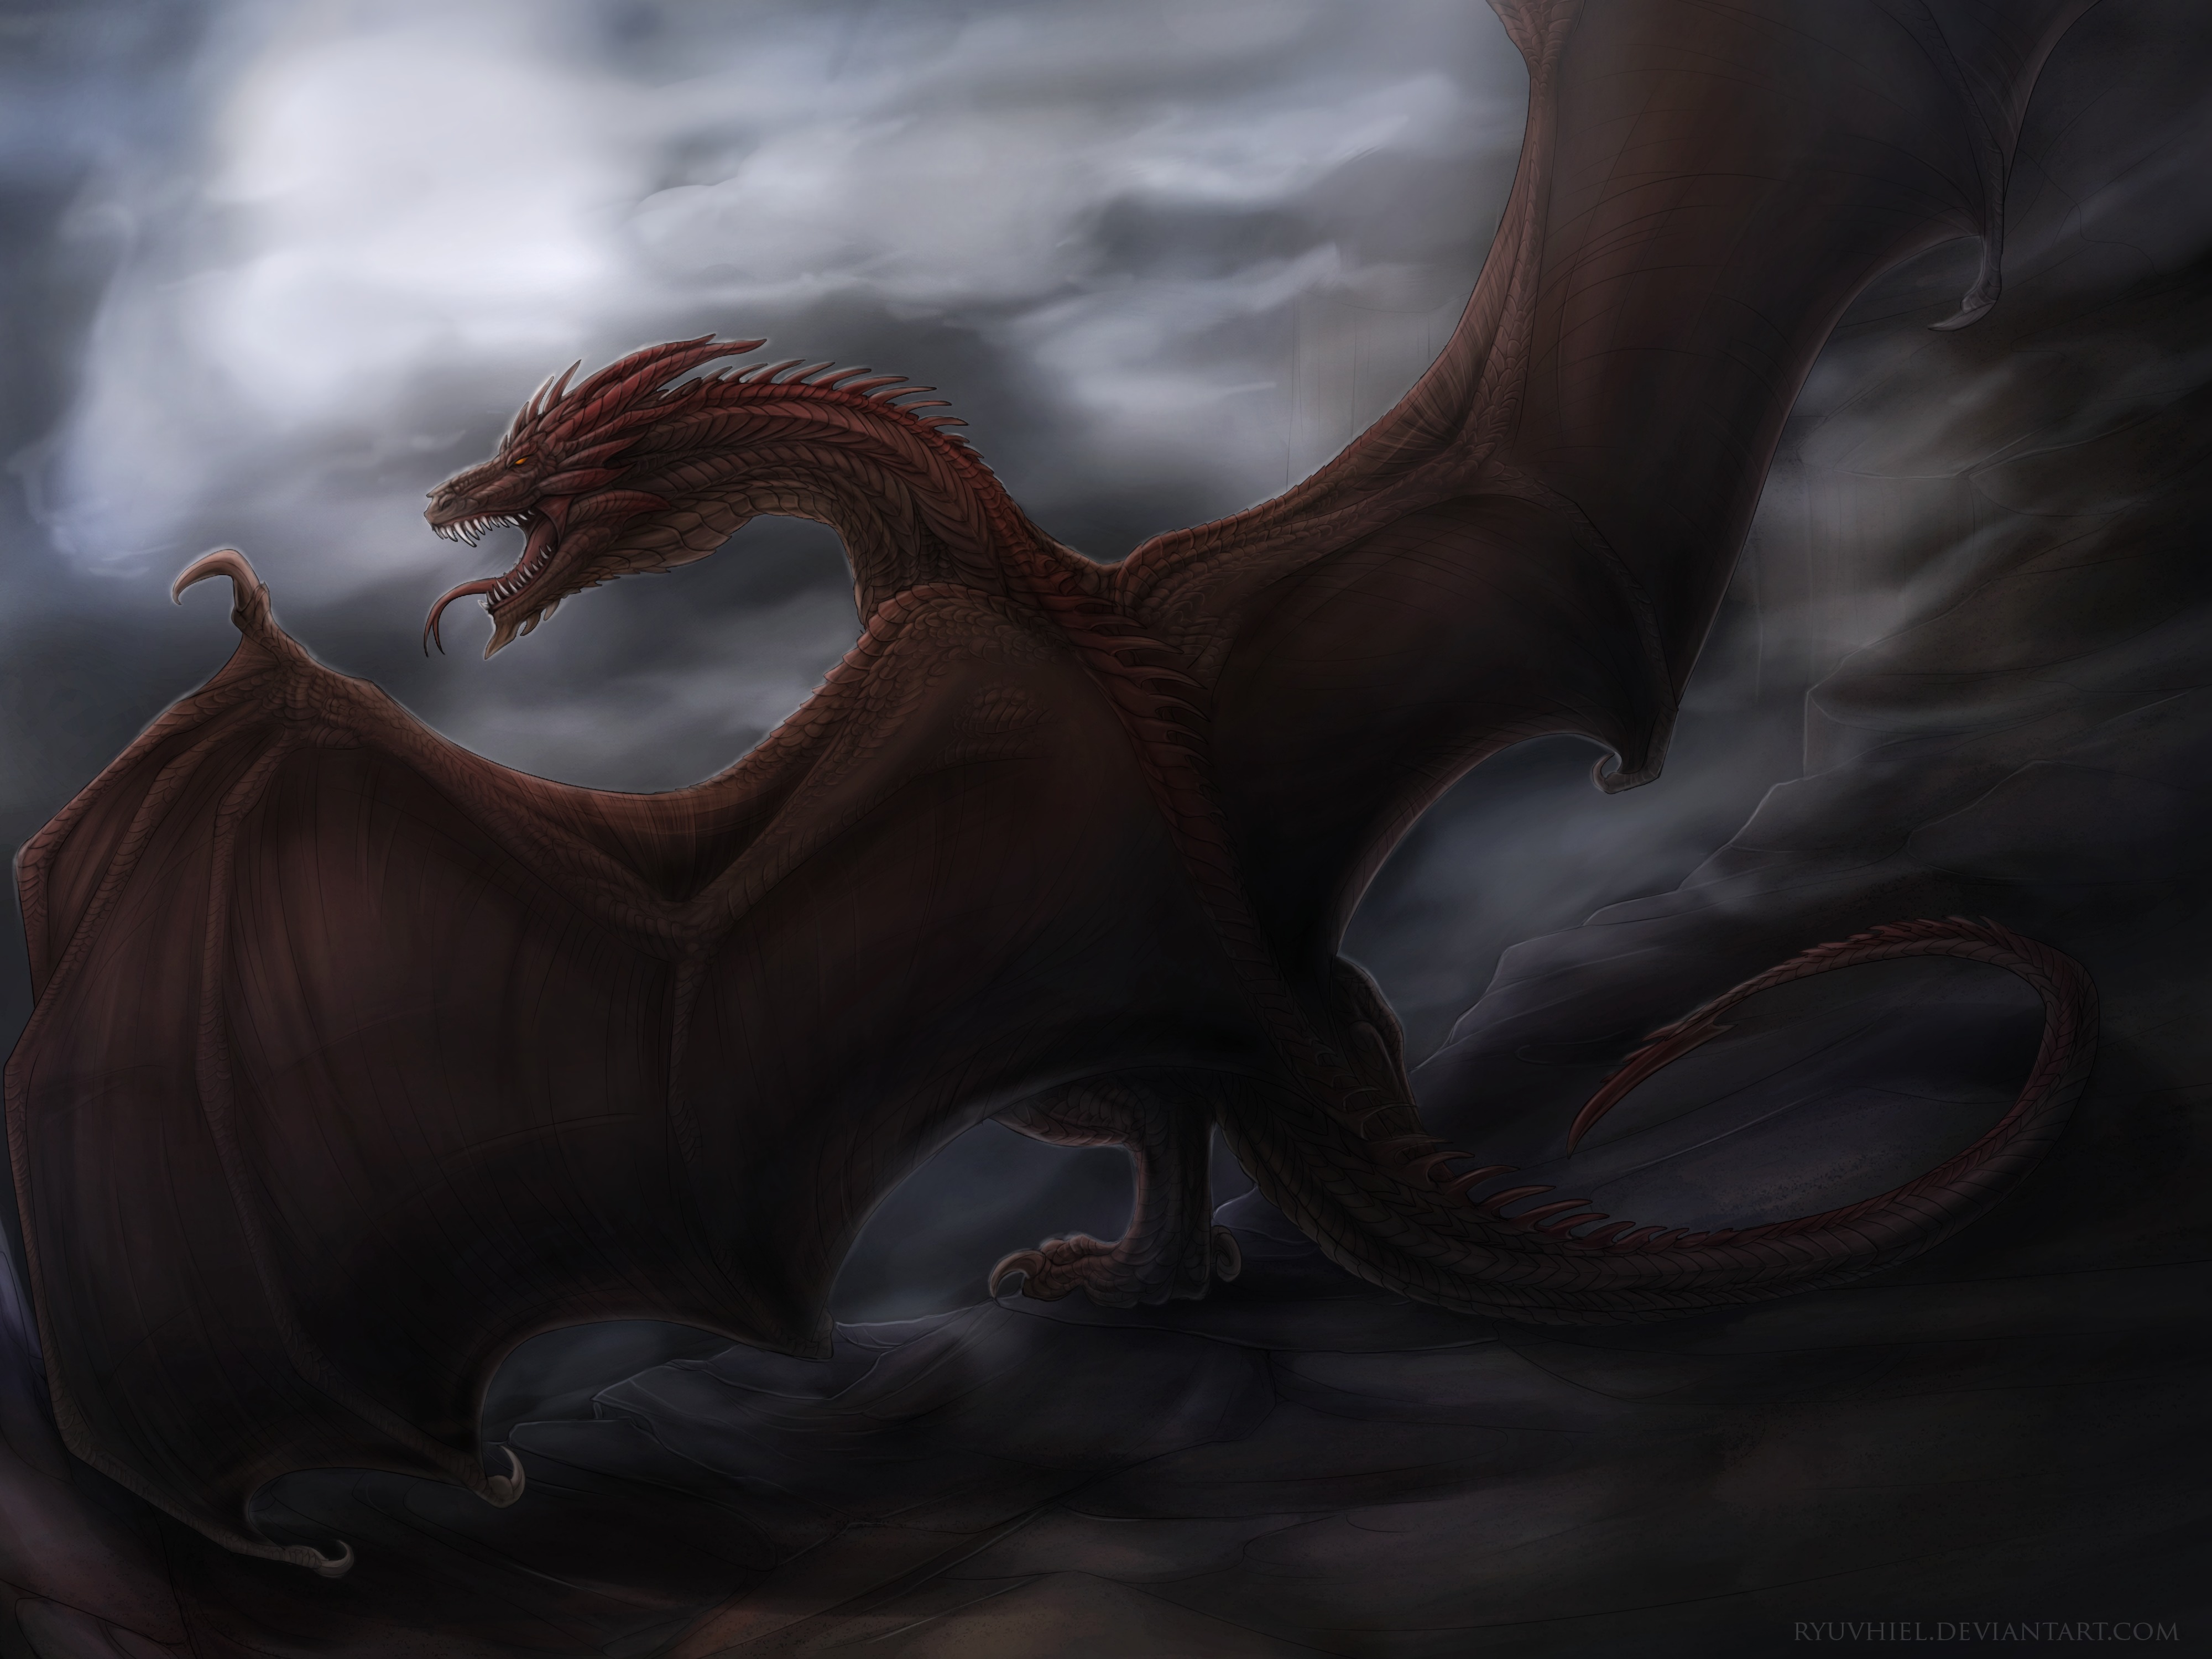 wings, art, fantastic, dragon collection of HD images